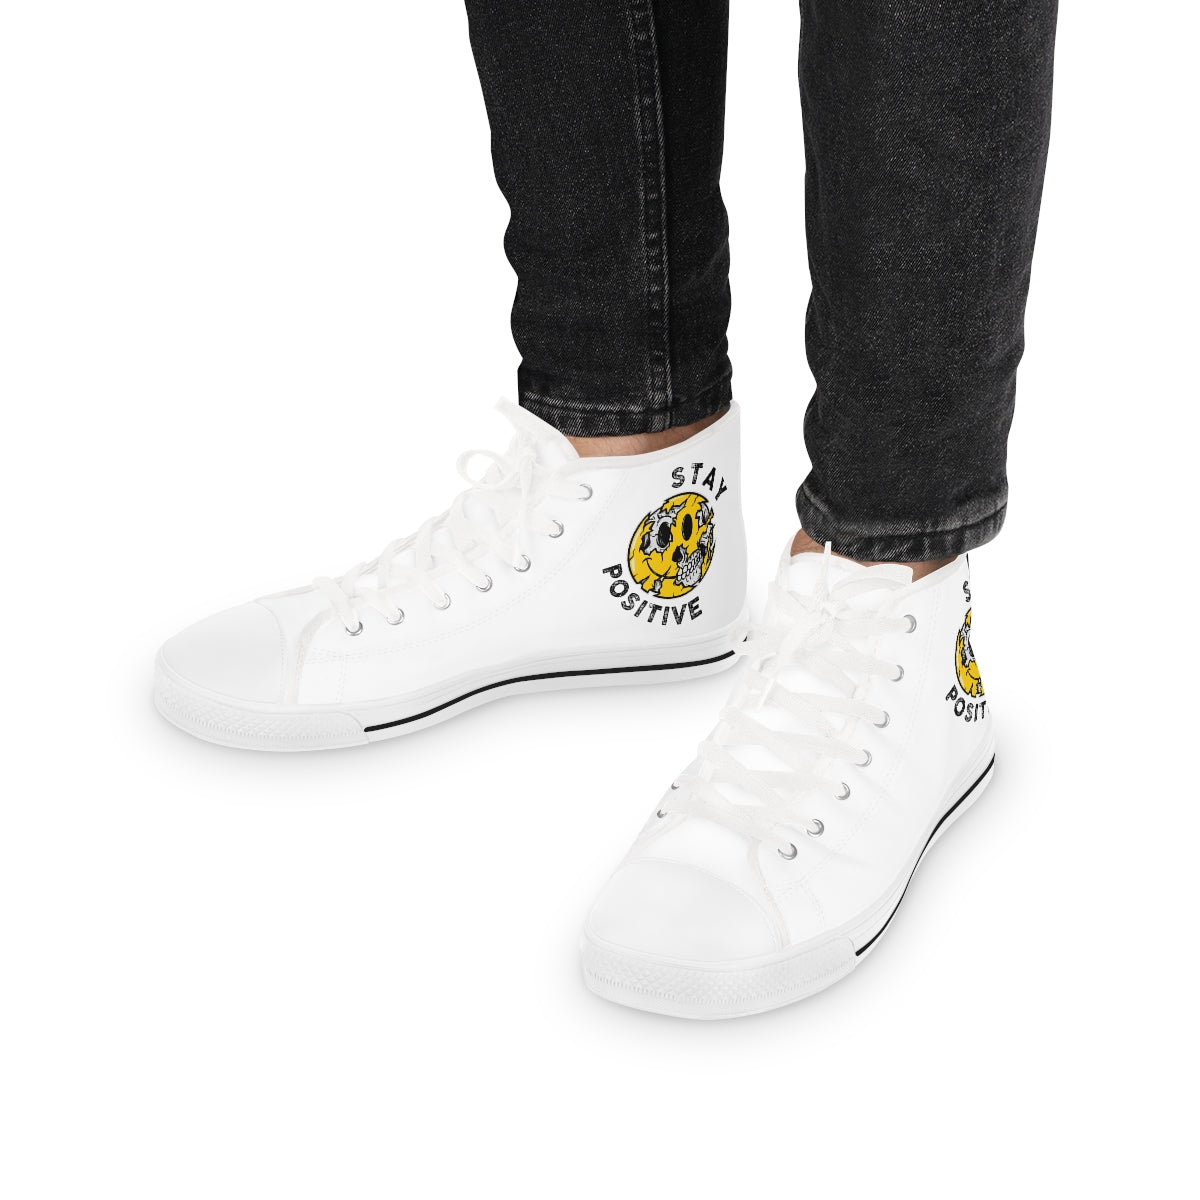 Stay Positive [White] - Men's High Top Sneakers